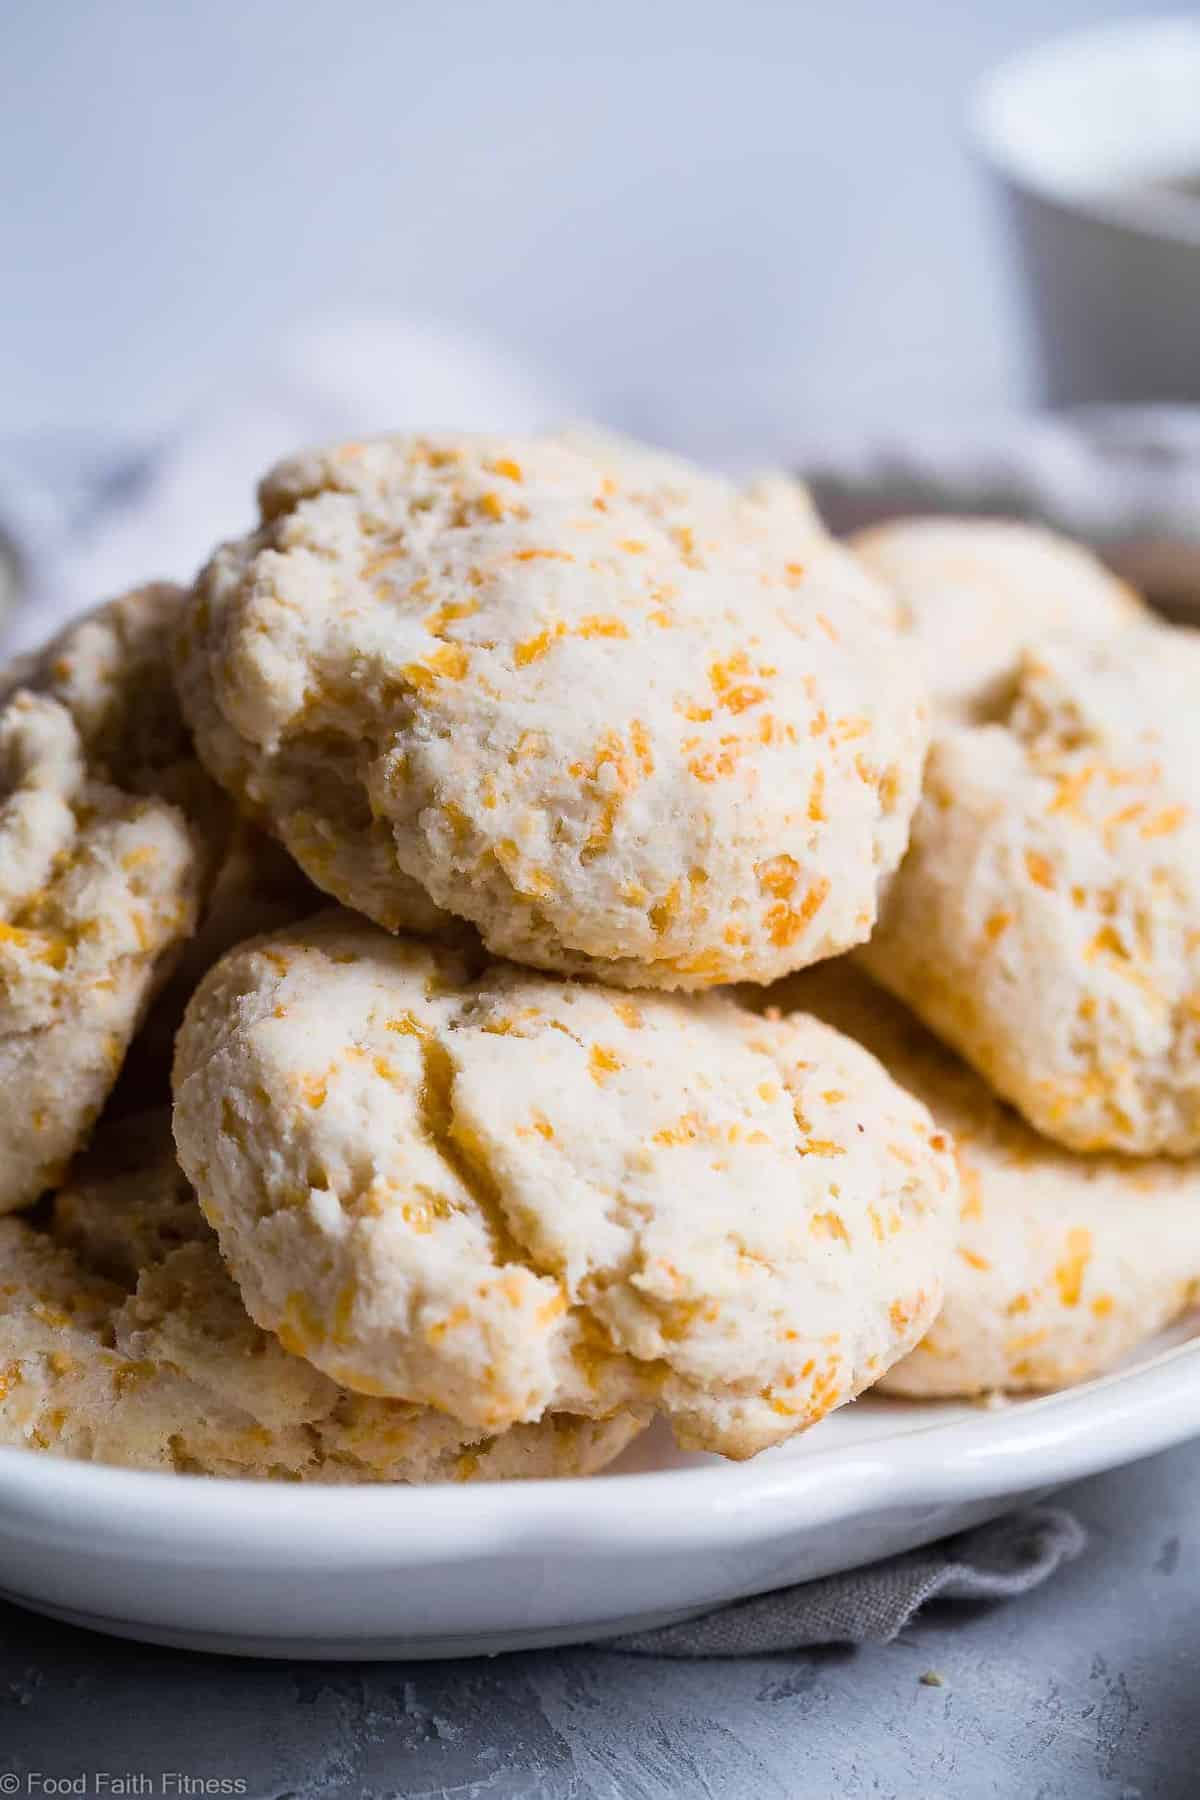 Gluten Free Buttermilk Cheddar Biscuits - These biscuits are SO flaky, soft and buttery that you won't believe how easy they are! These are hands down the BEST gluten free biscuits! | #Foodfaithfitness | #Glutenfree #Healthy #Biscuits #Sugarfree